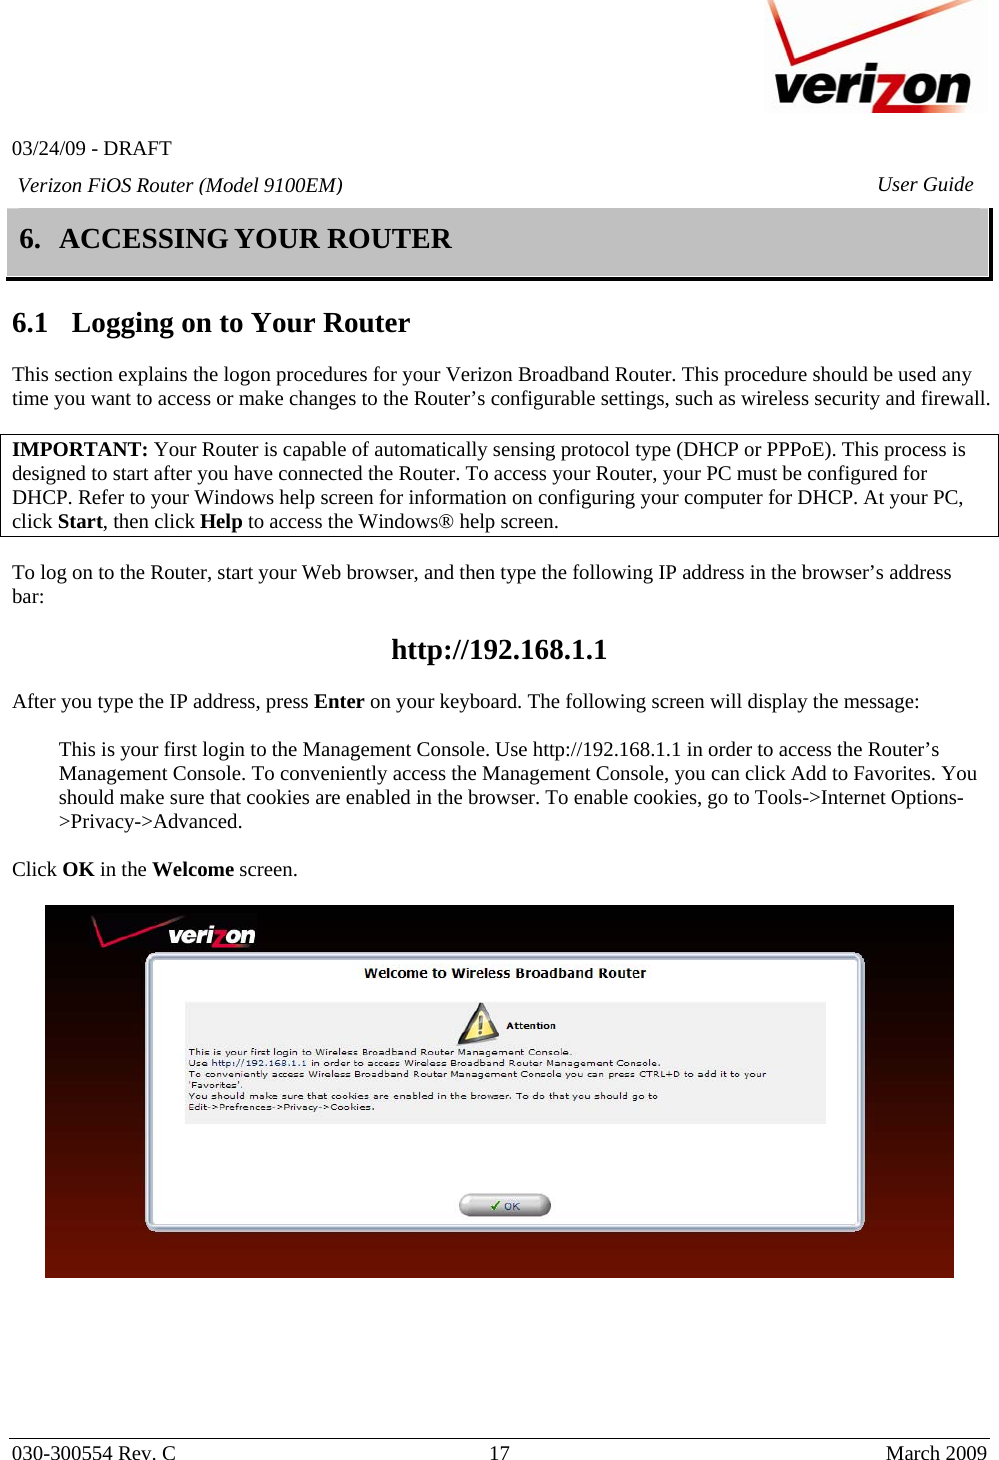   03/24/09 - DRAFT   030-300554 Rev. C  17      March 2009  Verizon FiOS Router (Model 9100EM) User Guide6. ACCESSING YOUR ROUTER  6.1 Logging on to Your Router  This section explains the logon procedures for your Verizon Broadband Router. This procedure should be used any time you want to access or make changes to the Router’s configurable settings, such as wireless security and firewall.  IMPORTANT: Your Router is capable of automatically sensing protocol type (DHCP or PPPoE). This process is designed to start after you have connected the Router. To access your Router, your PC must be configured for DHCP. Refer to your Windows help screen for information on configuring your computer for DHCP. At your PC, click Start, then click Help to access the Windows® help screen.  To log on to the Router, start your Web browser, and then type the following IP address in the browser’s address bar:   http://192.168.1.1   After you type the IP address, press Enter on your keyboard. The following screen will display the message:  This is your first login to the Management Console. Use http://192.168.1.1 in order to access the Router’s Management Console. To conveniently access the Management Console, you can click Add to Favorites. You should make sure that cookies are enabled in the browser. To enable cookies, go to Tools-&gt;Internet Options-&gt;Privacy-&gt;Advanced.   Click OK in the Welcome screen.       